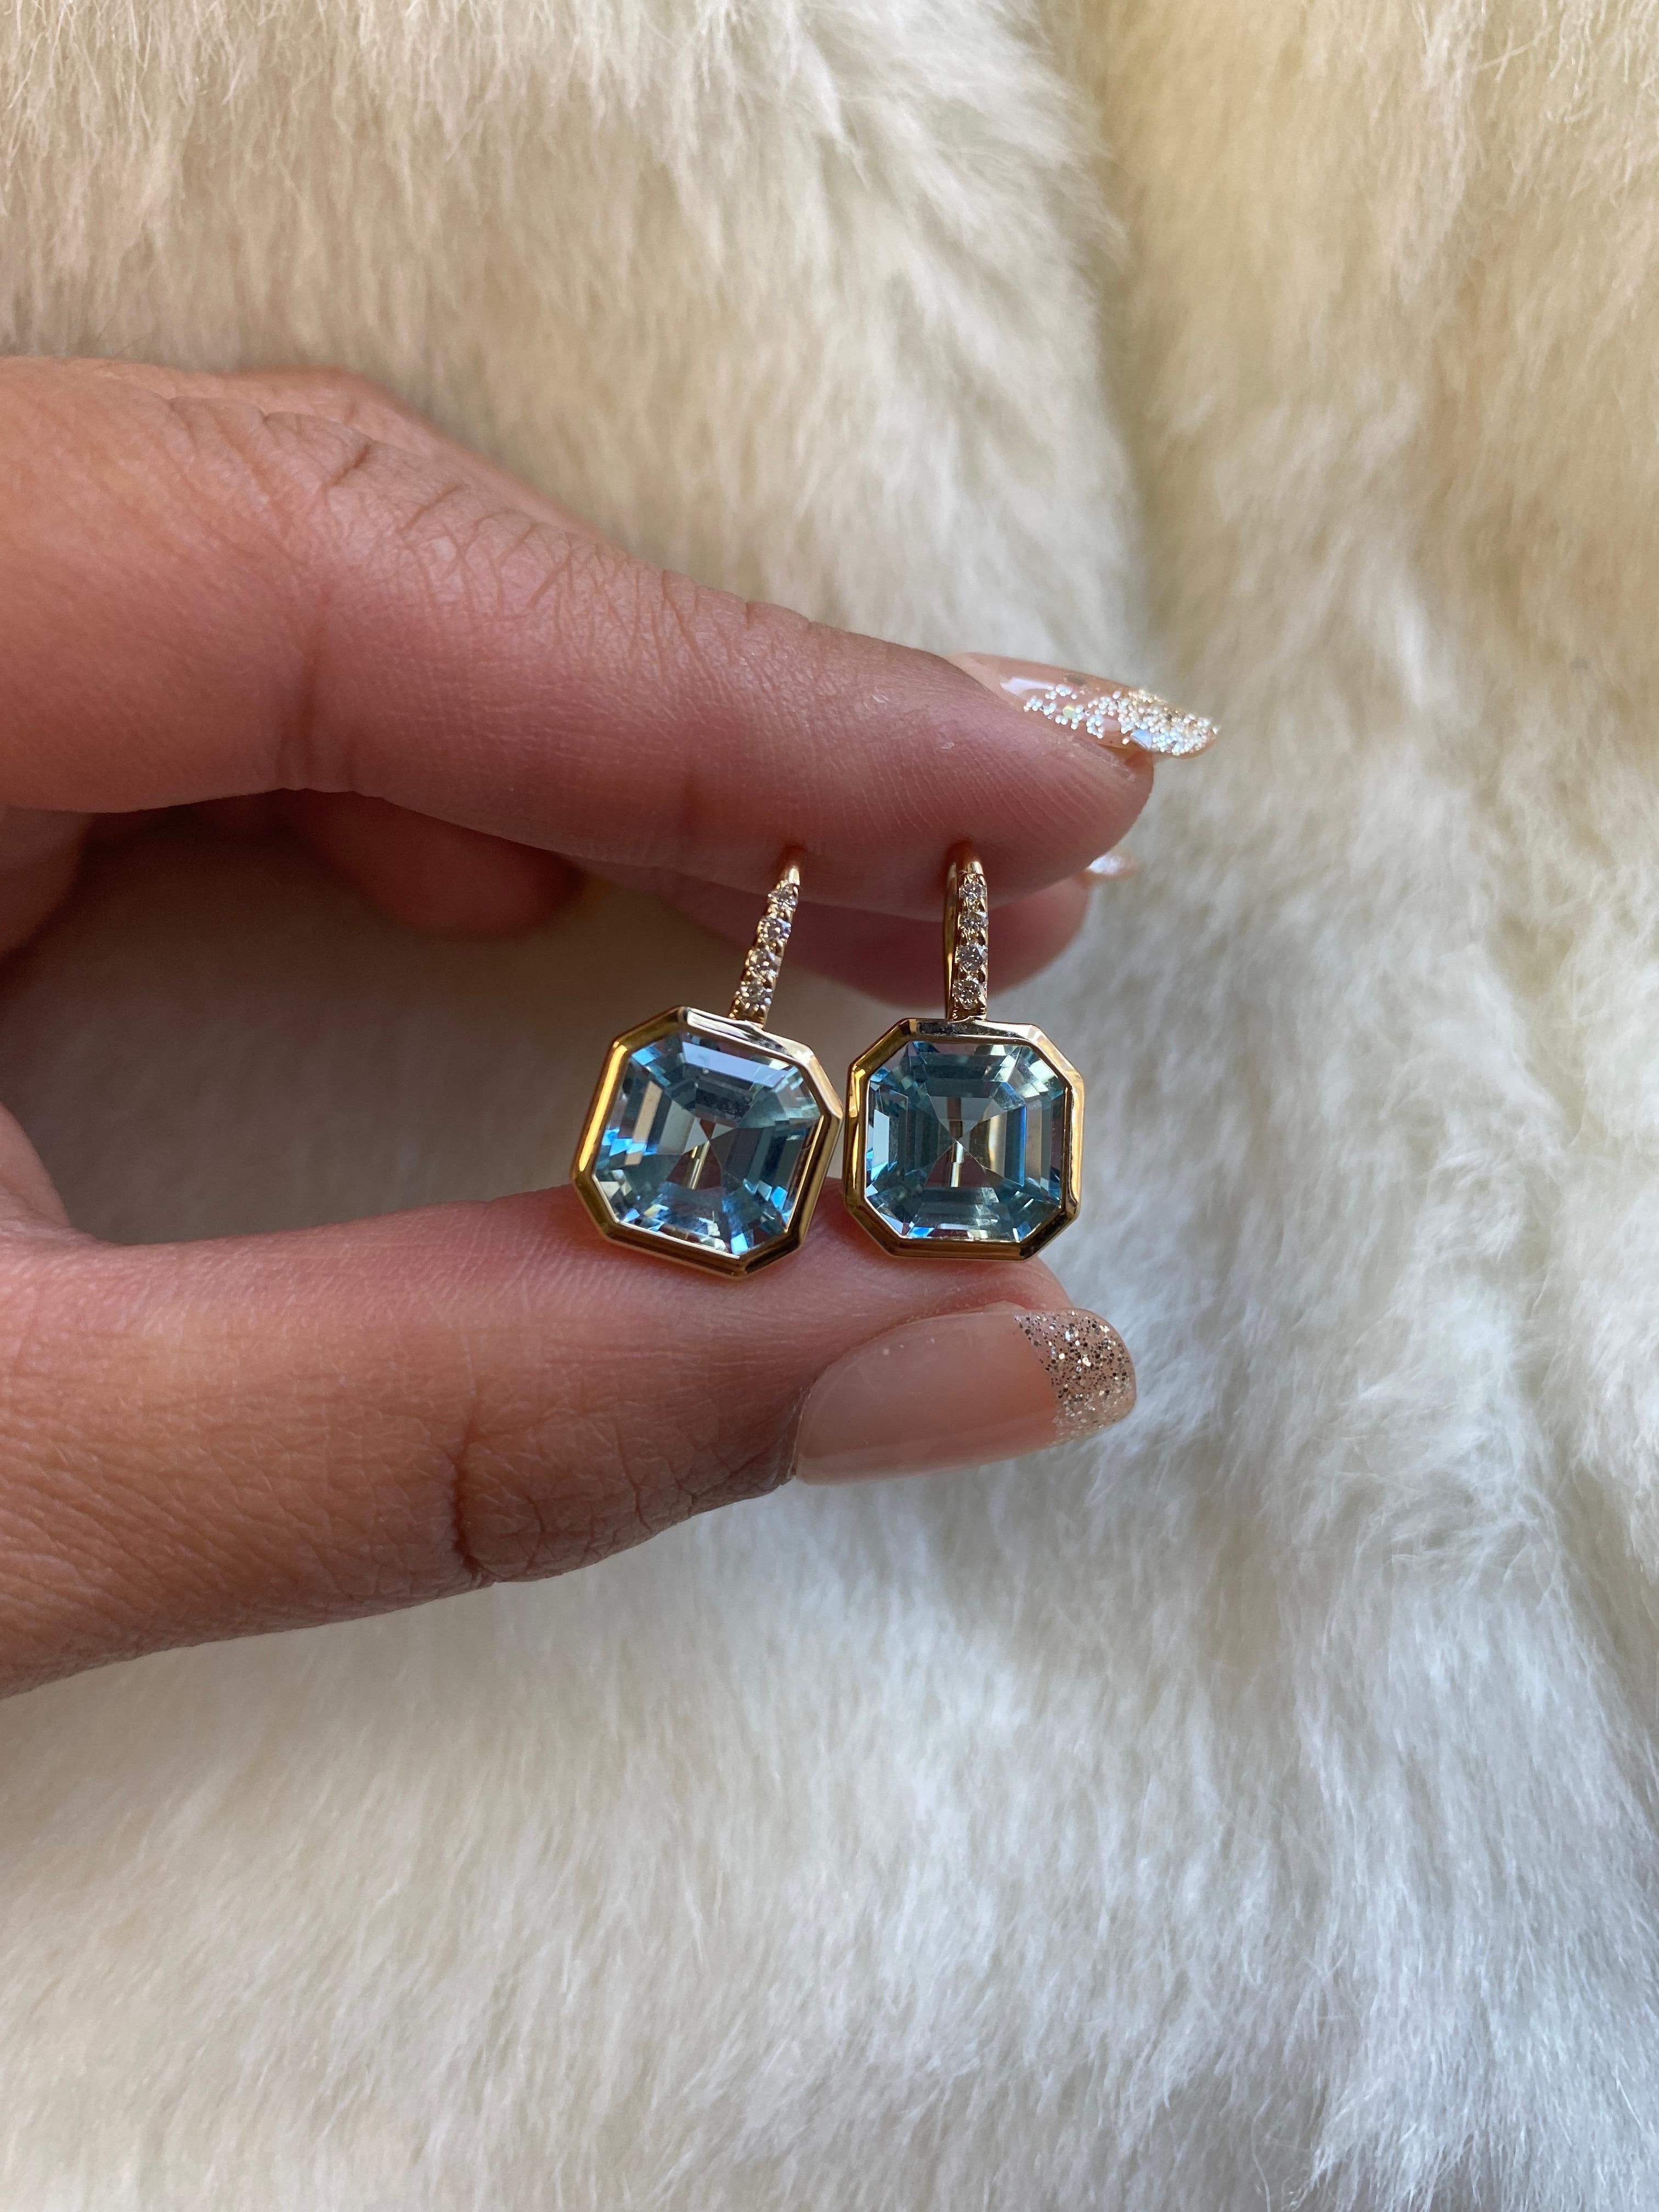 Elevate your style with these exquisite earrings featuring a stunning 9 x 9 mm Asscher-cut Blue Topaz gemstone. Expertly set on a delicate wire of 18K Gold, these earrings are adorned with four dazzling Diamonds, adding a touch of luxury and sparkle